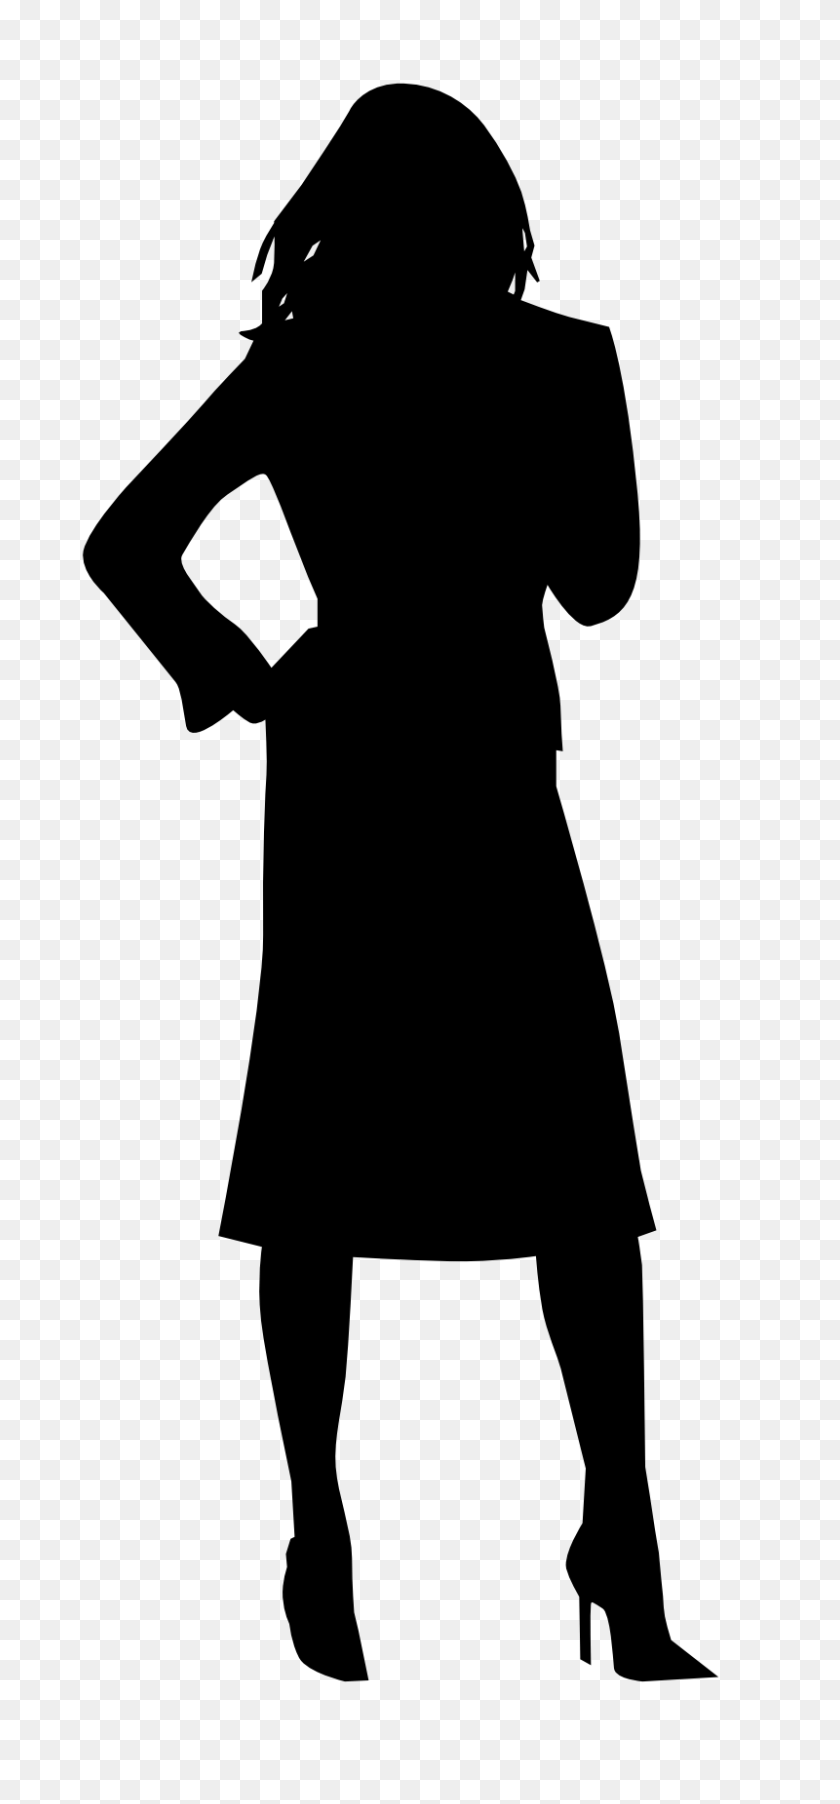 800x1789 Silhouette Png Transparent Images - Silhouette PNG